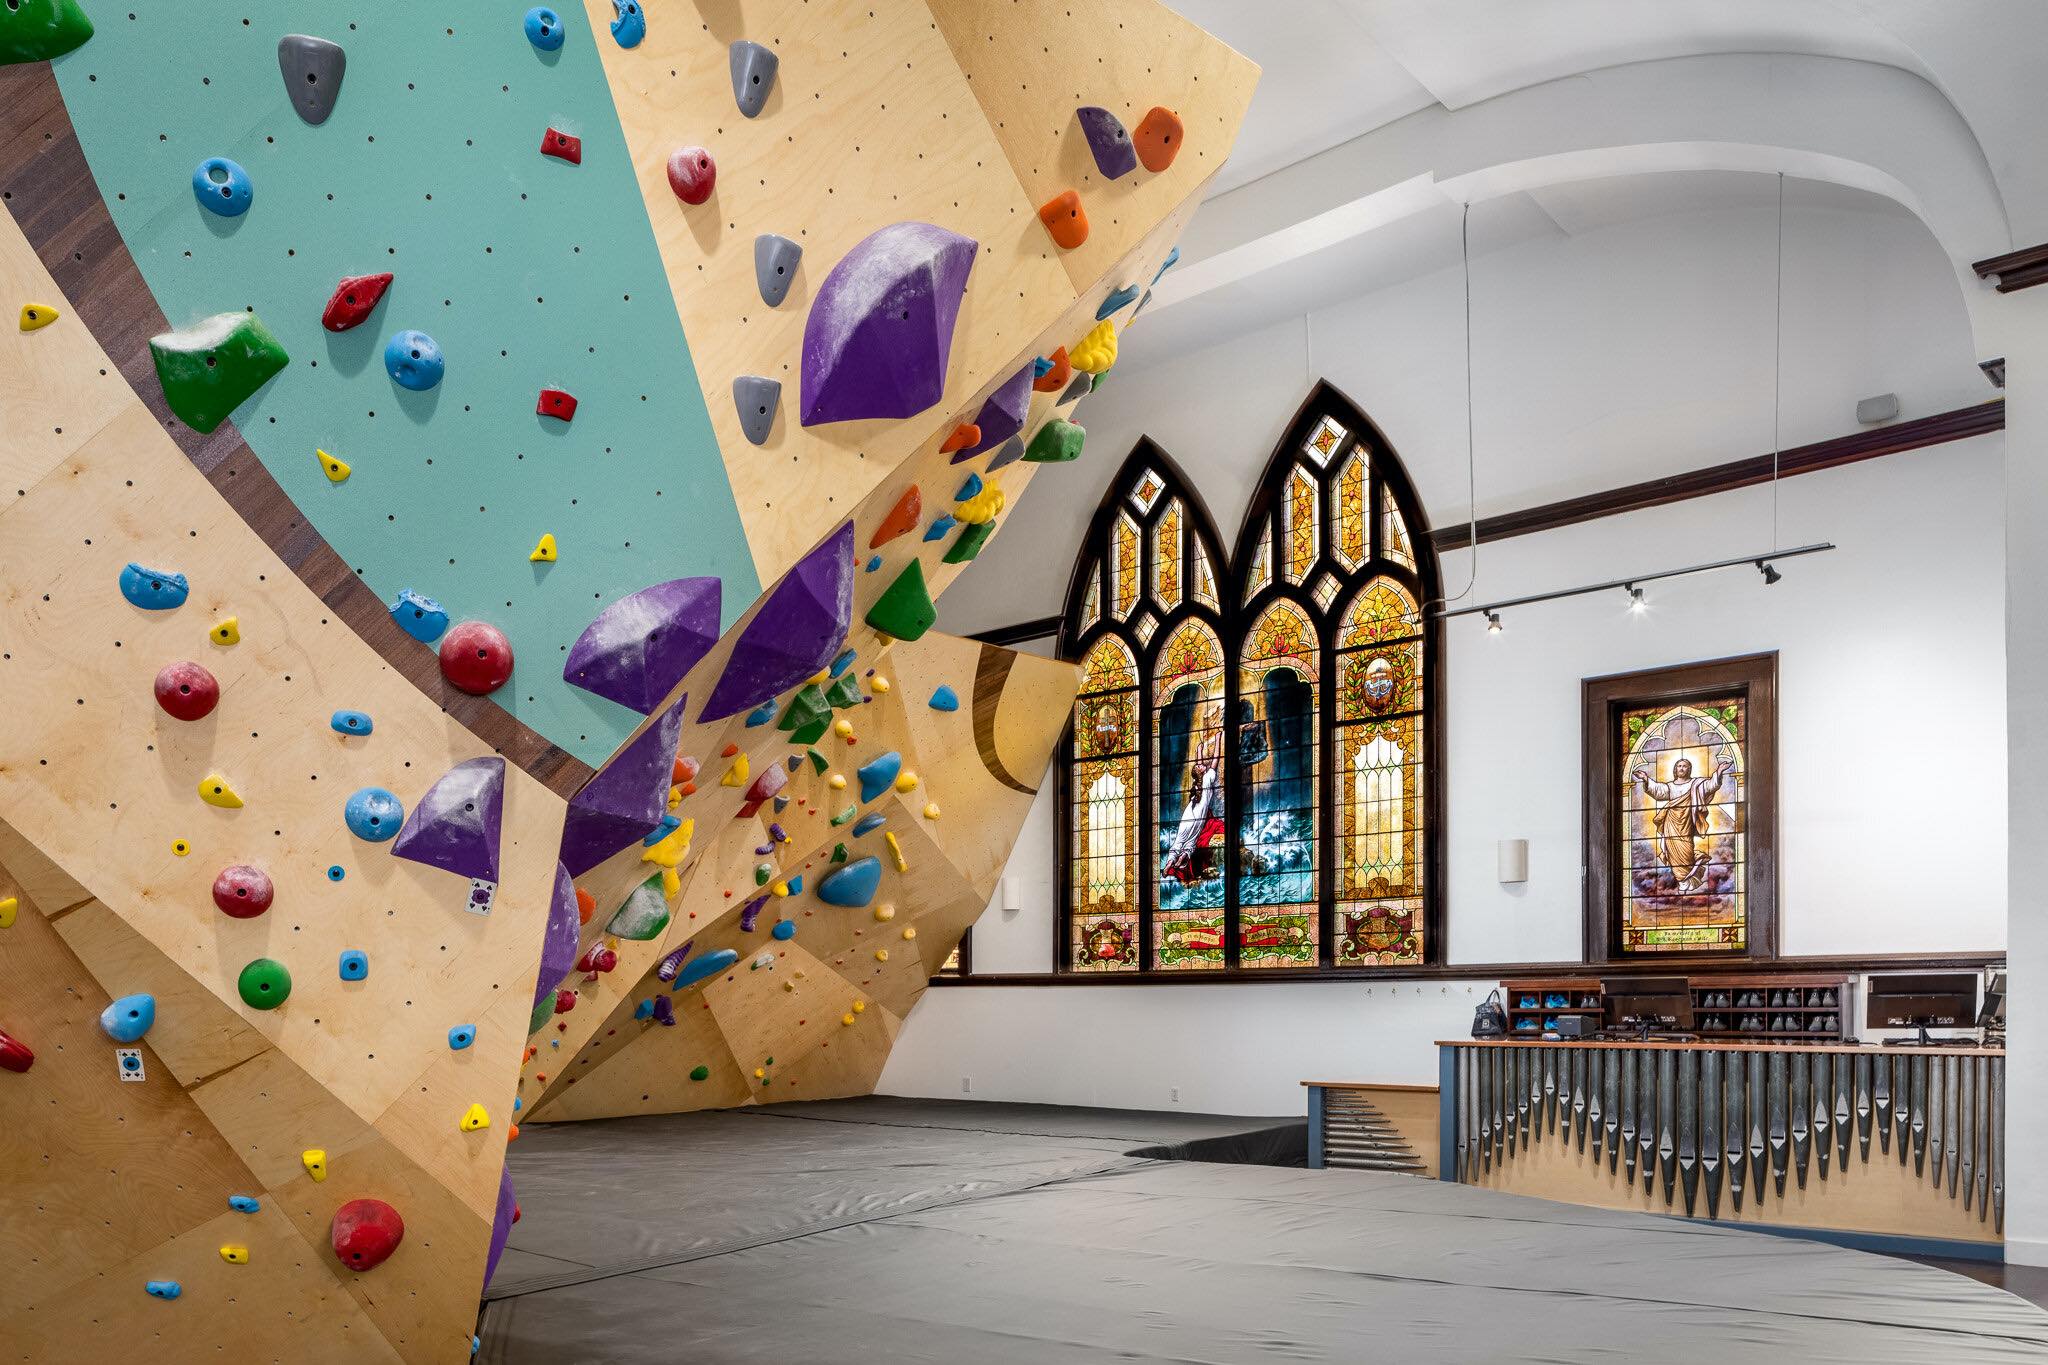 Climbing wall juxtaposed by church stained glass